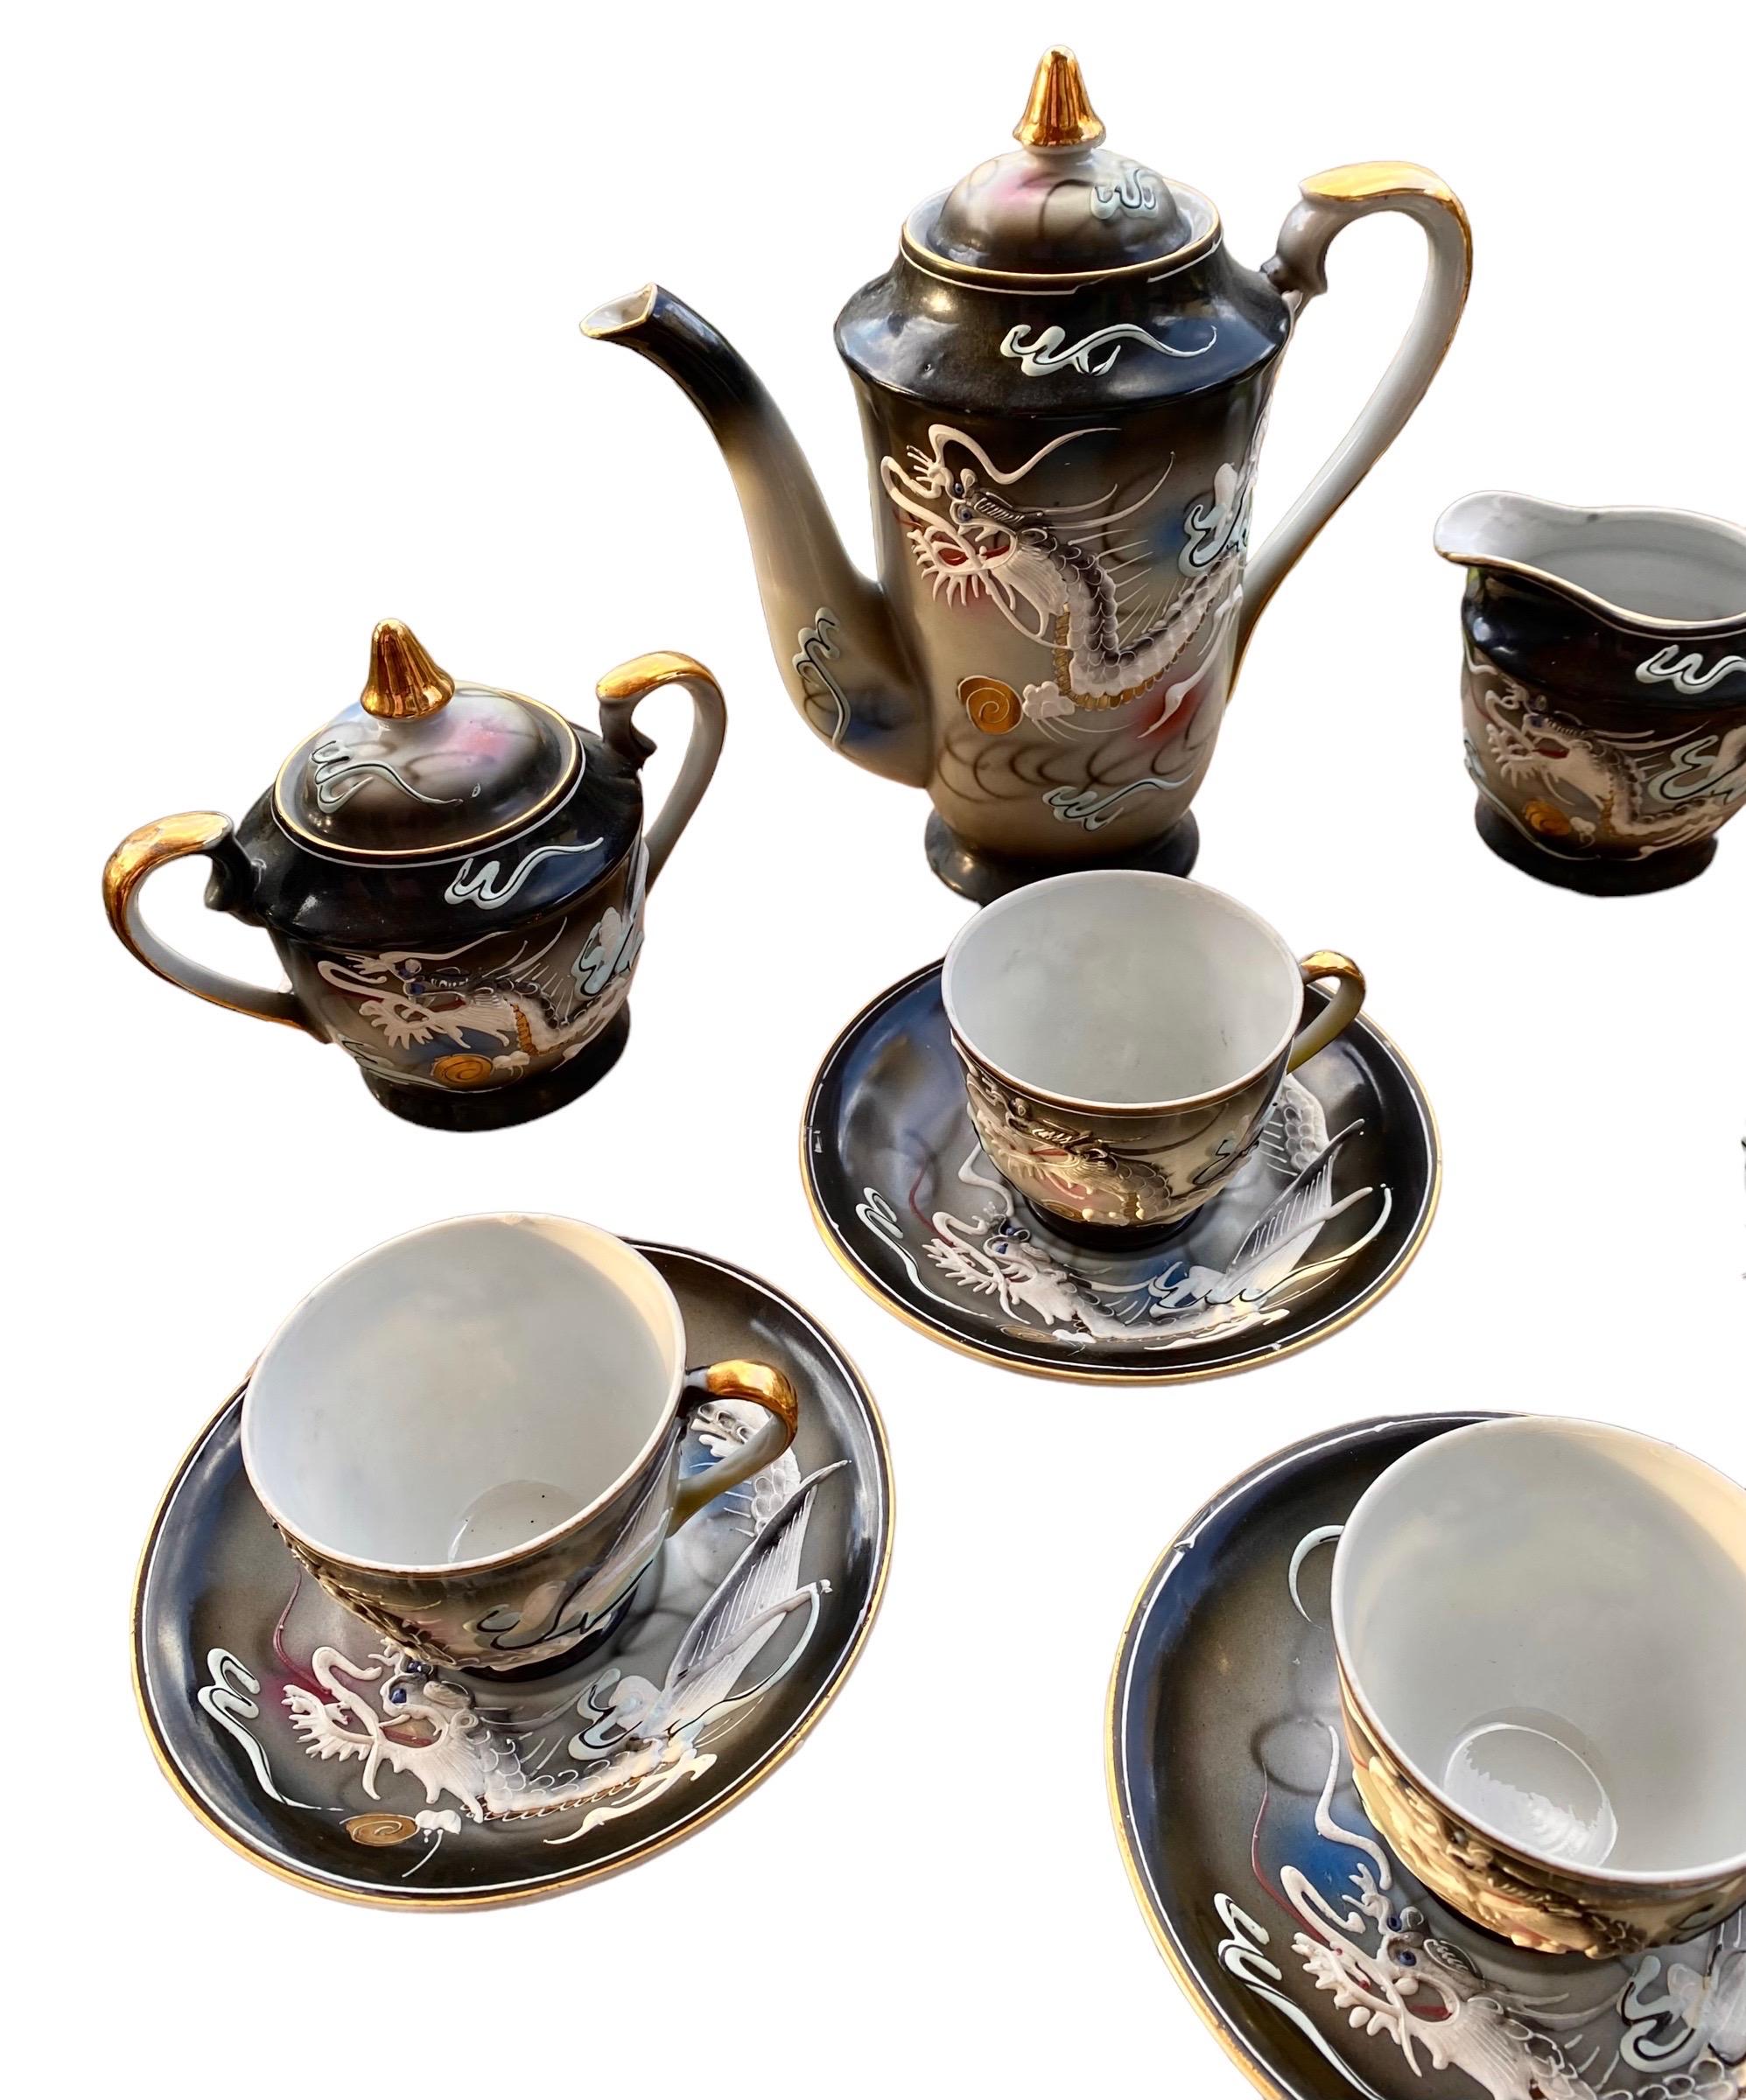 A lovely, artisanal, handcrafted porcelain Japan dragon ware tea set consisting of six demitasse cups and saucers, sugar bowl with lid creamer and tea pot with lid. The delicate, lovely dragon designs are raised and extremely textural, a delight to